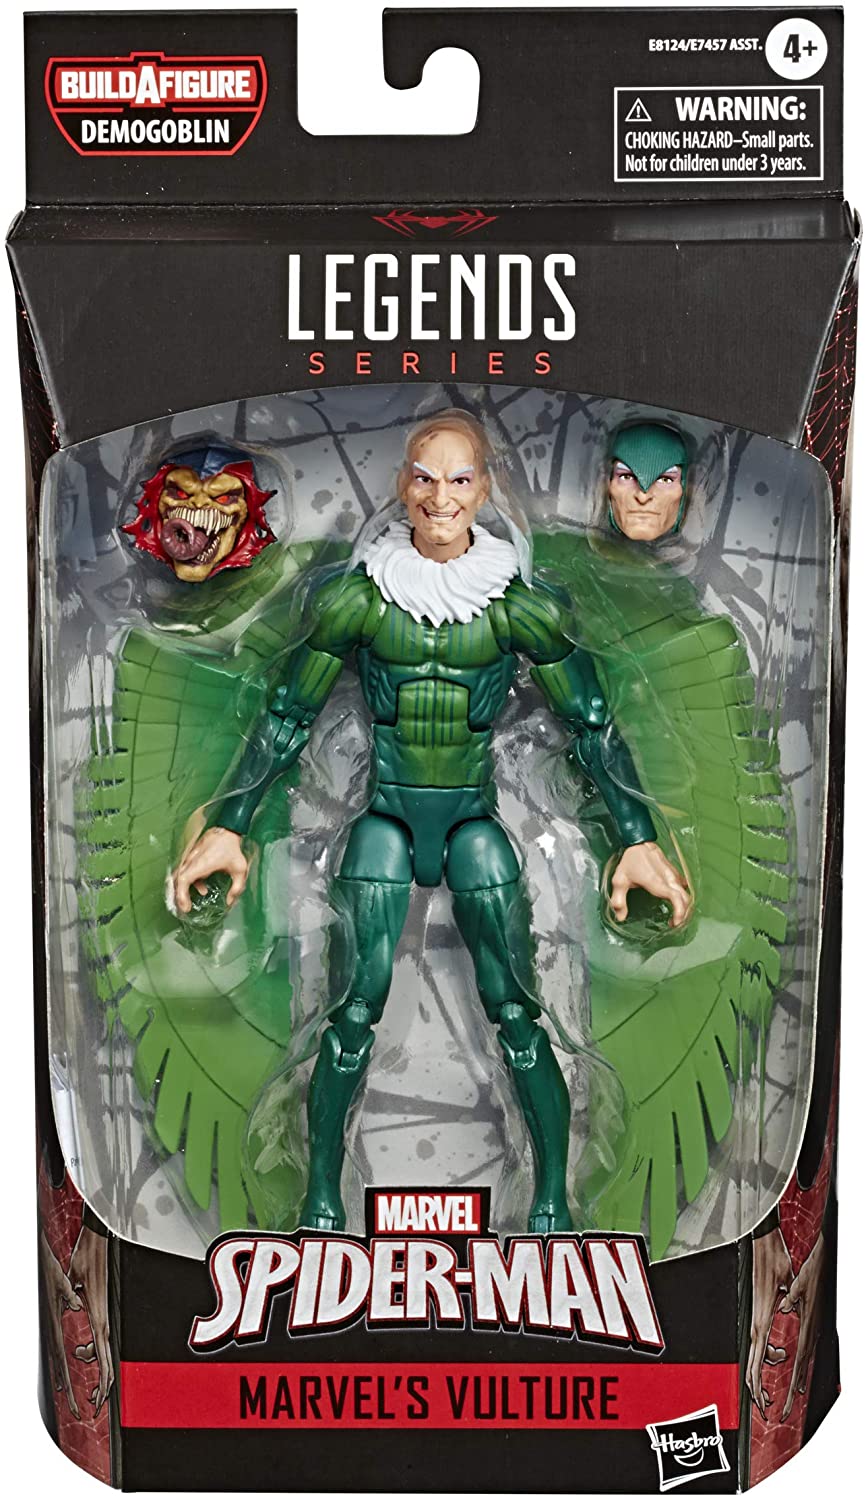 Hasbro Marvel Spider-Man Legends Series 15-cm Collectible Action Figure Marvel’s Vulture Toy, With Build-A-Figure Piece and Accessory